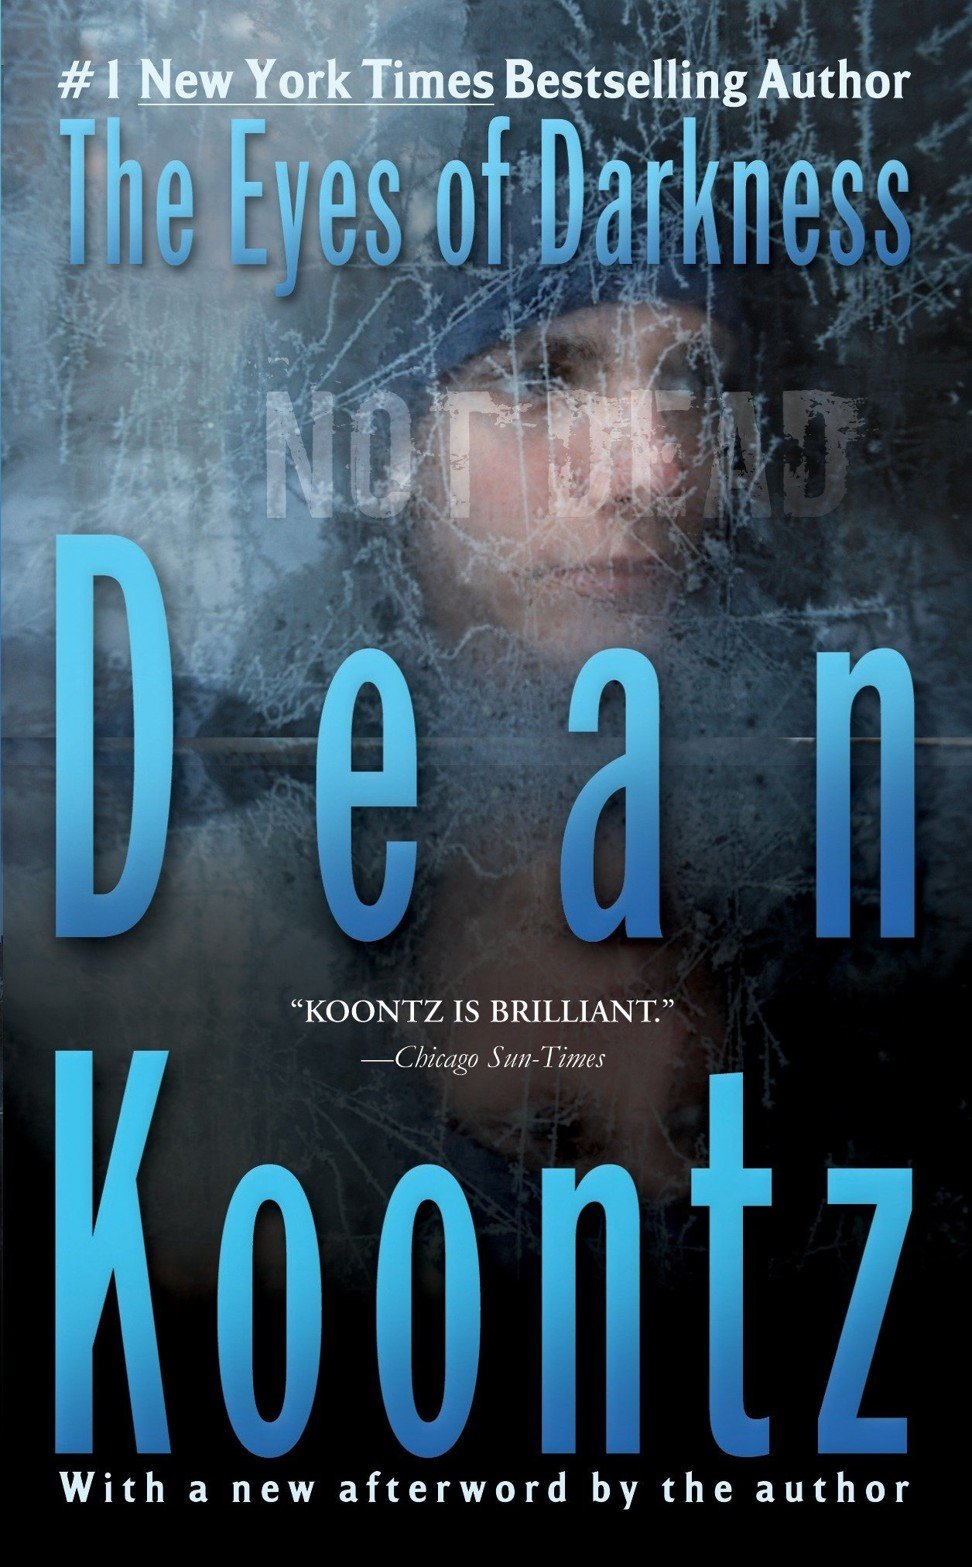 The Eyes of Darkness, by Koontz.